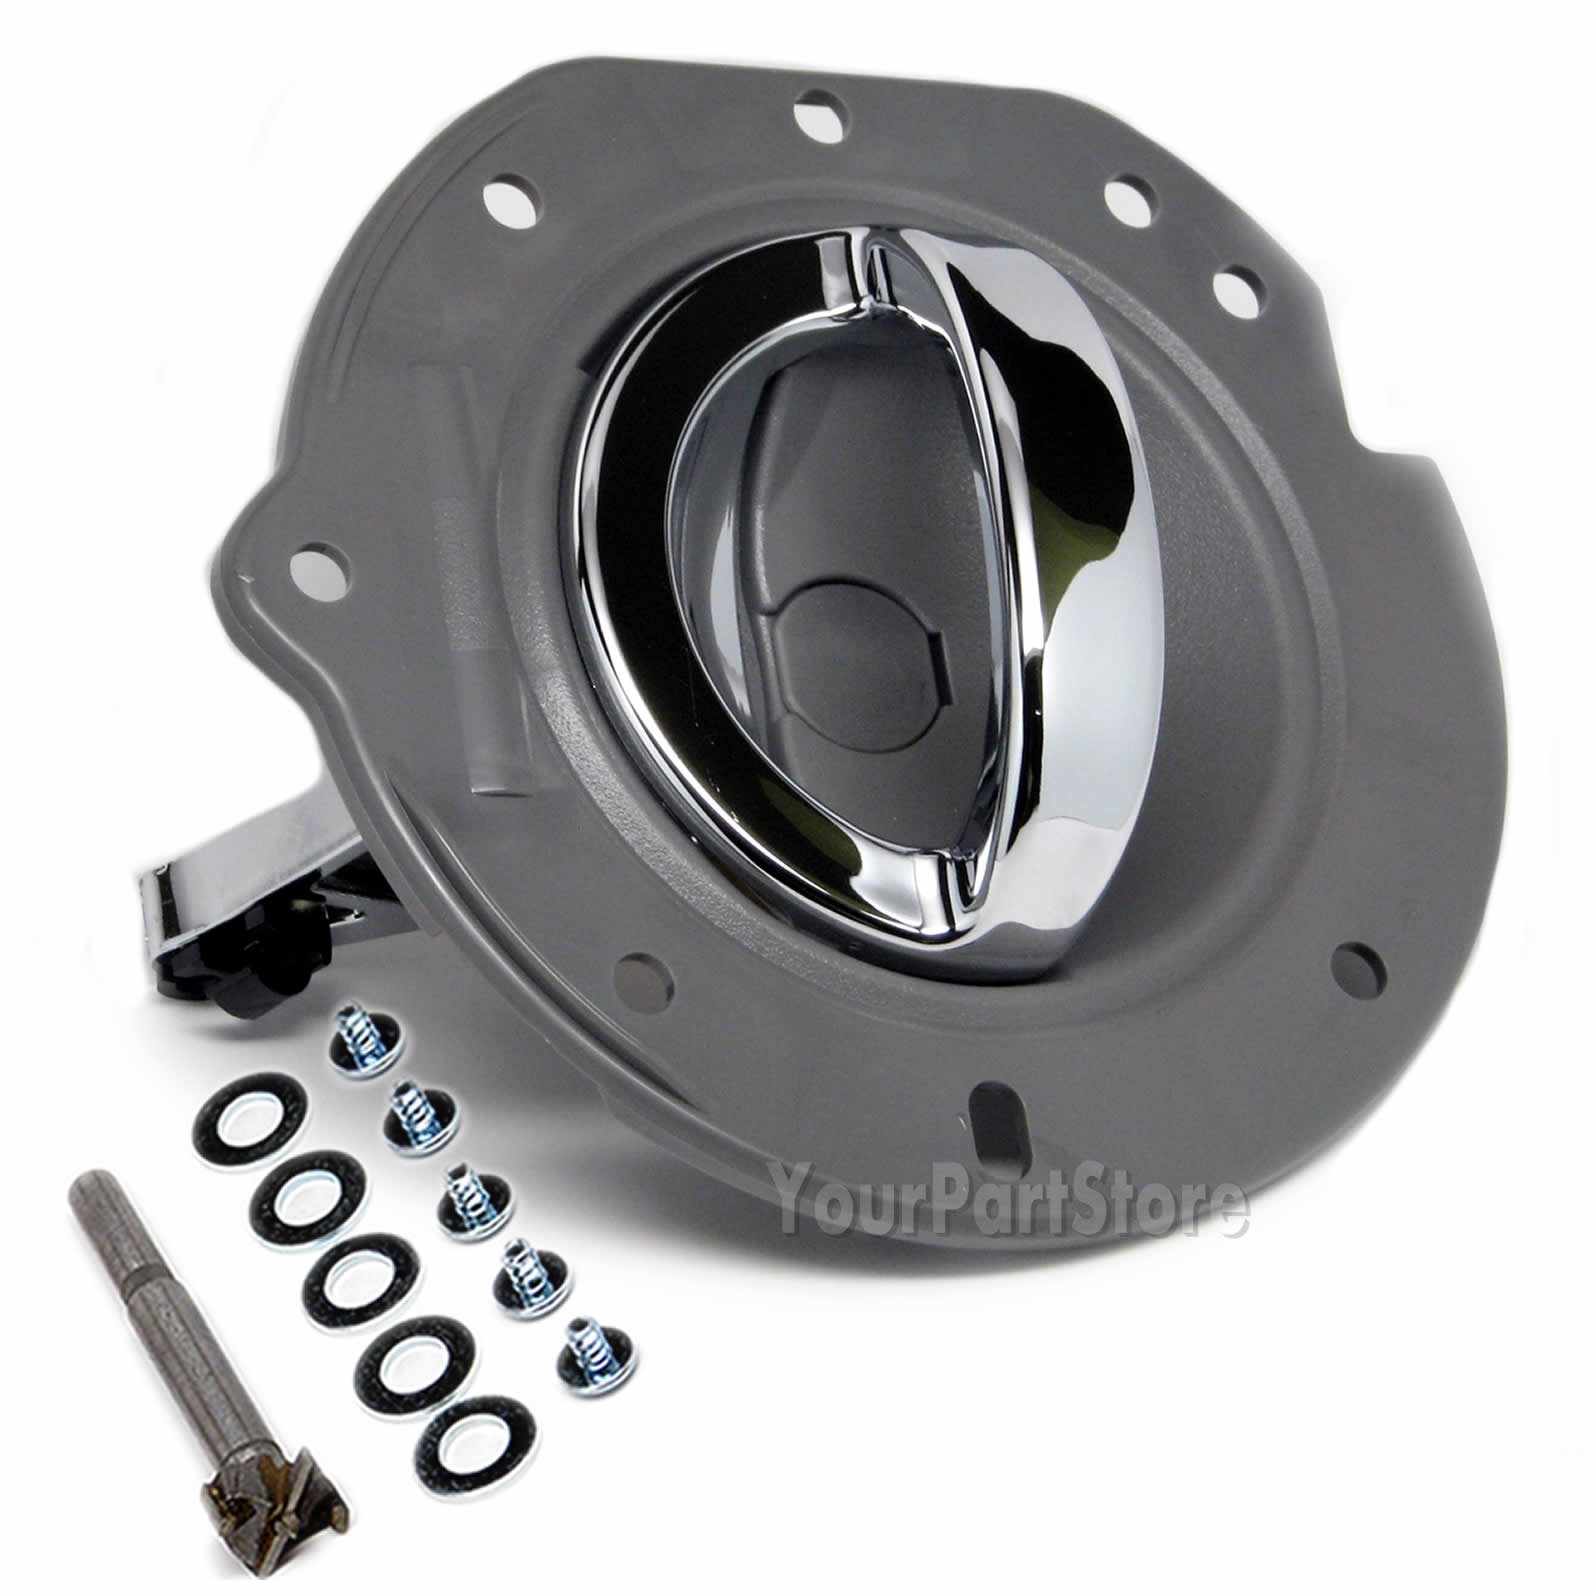 Details About Jeep Liberty Inside Interior Door Pull Handle Left Front Rear Gray Chrome Kit